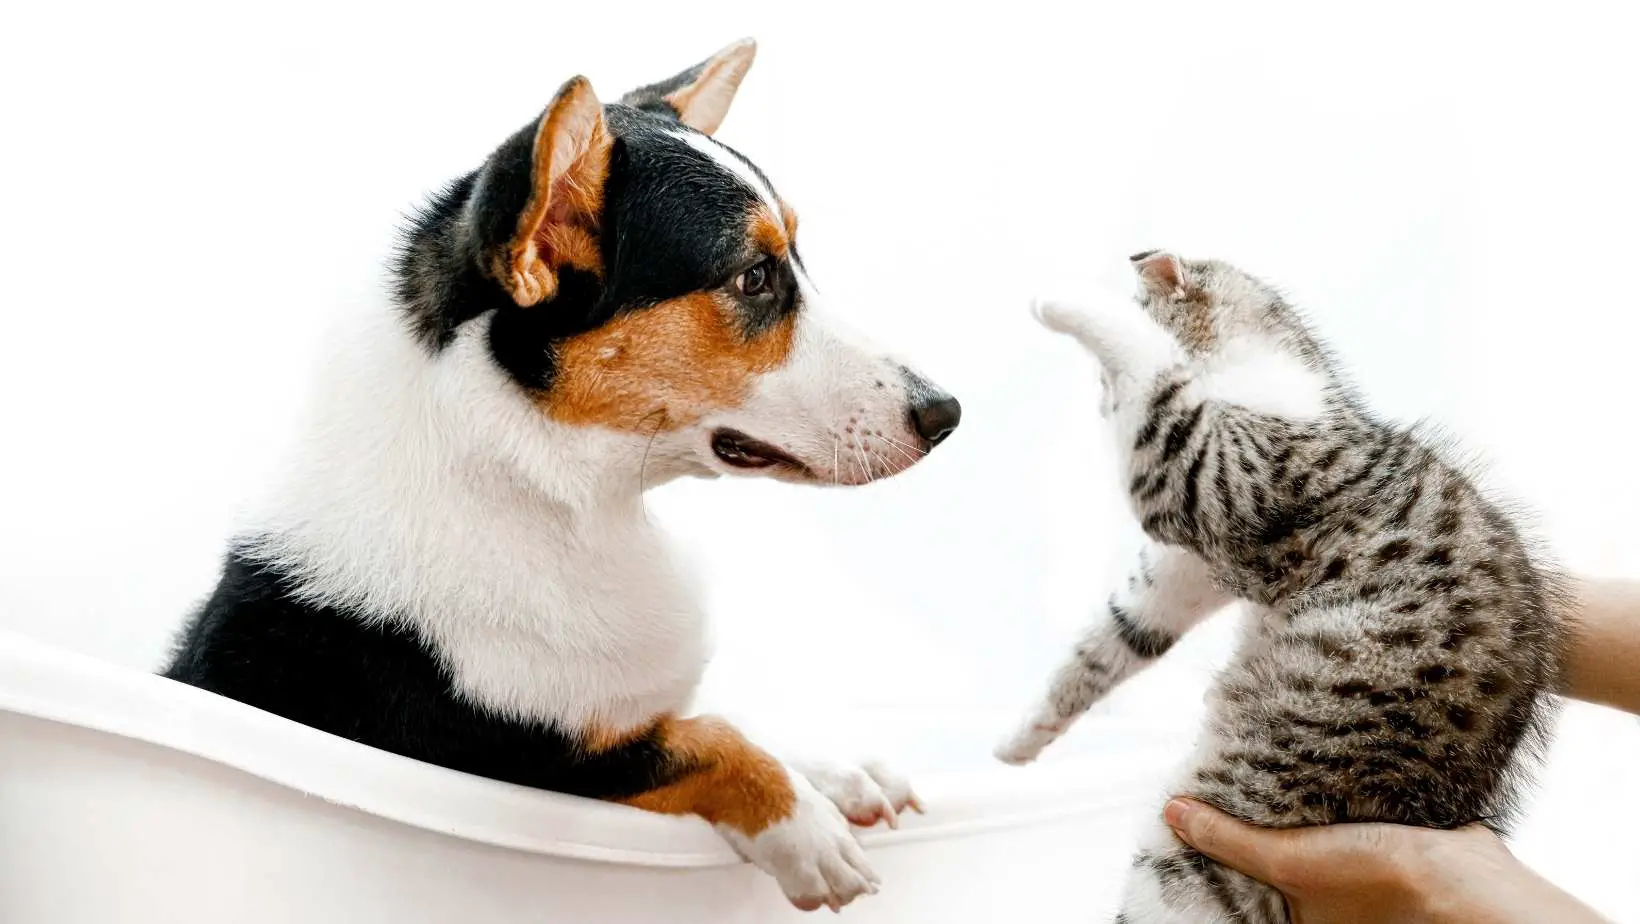 How to Introduce a Cat to a Dog?